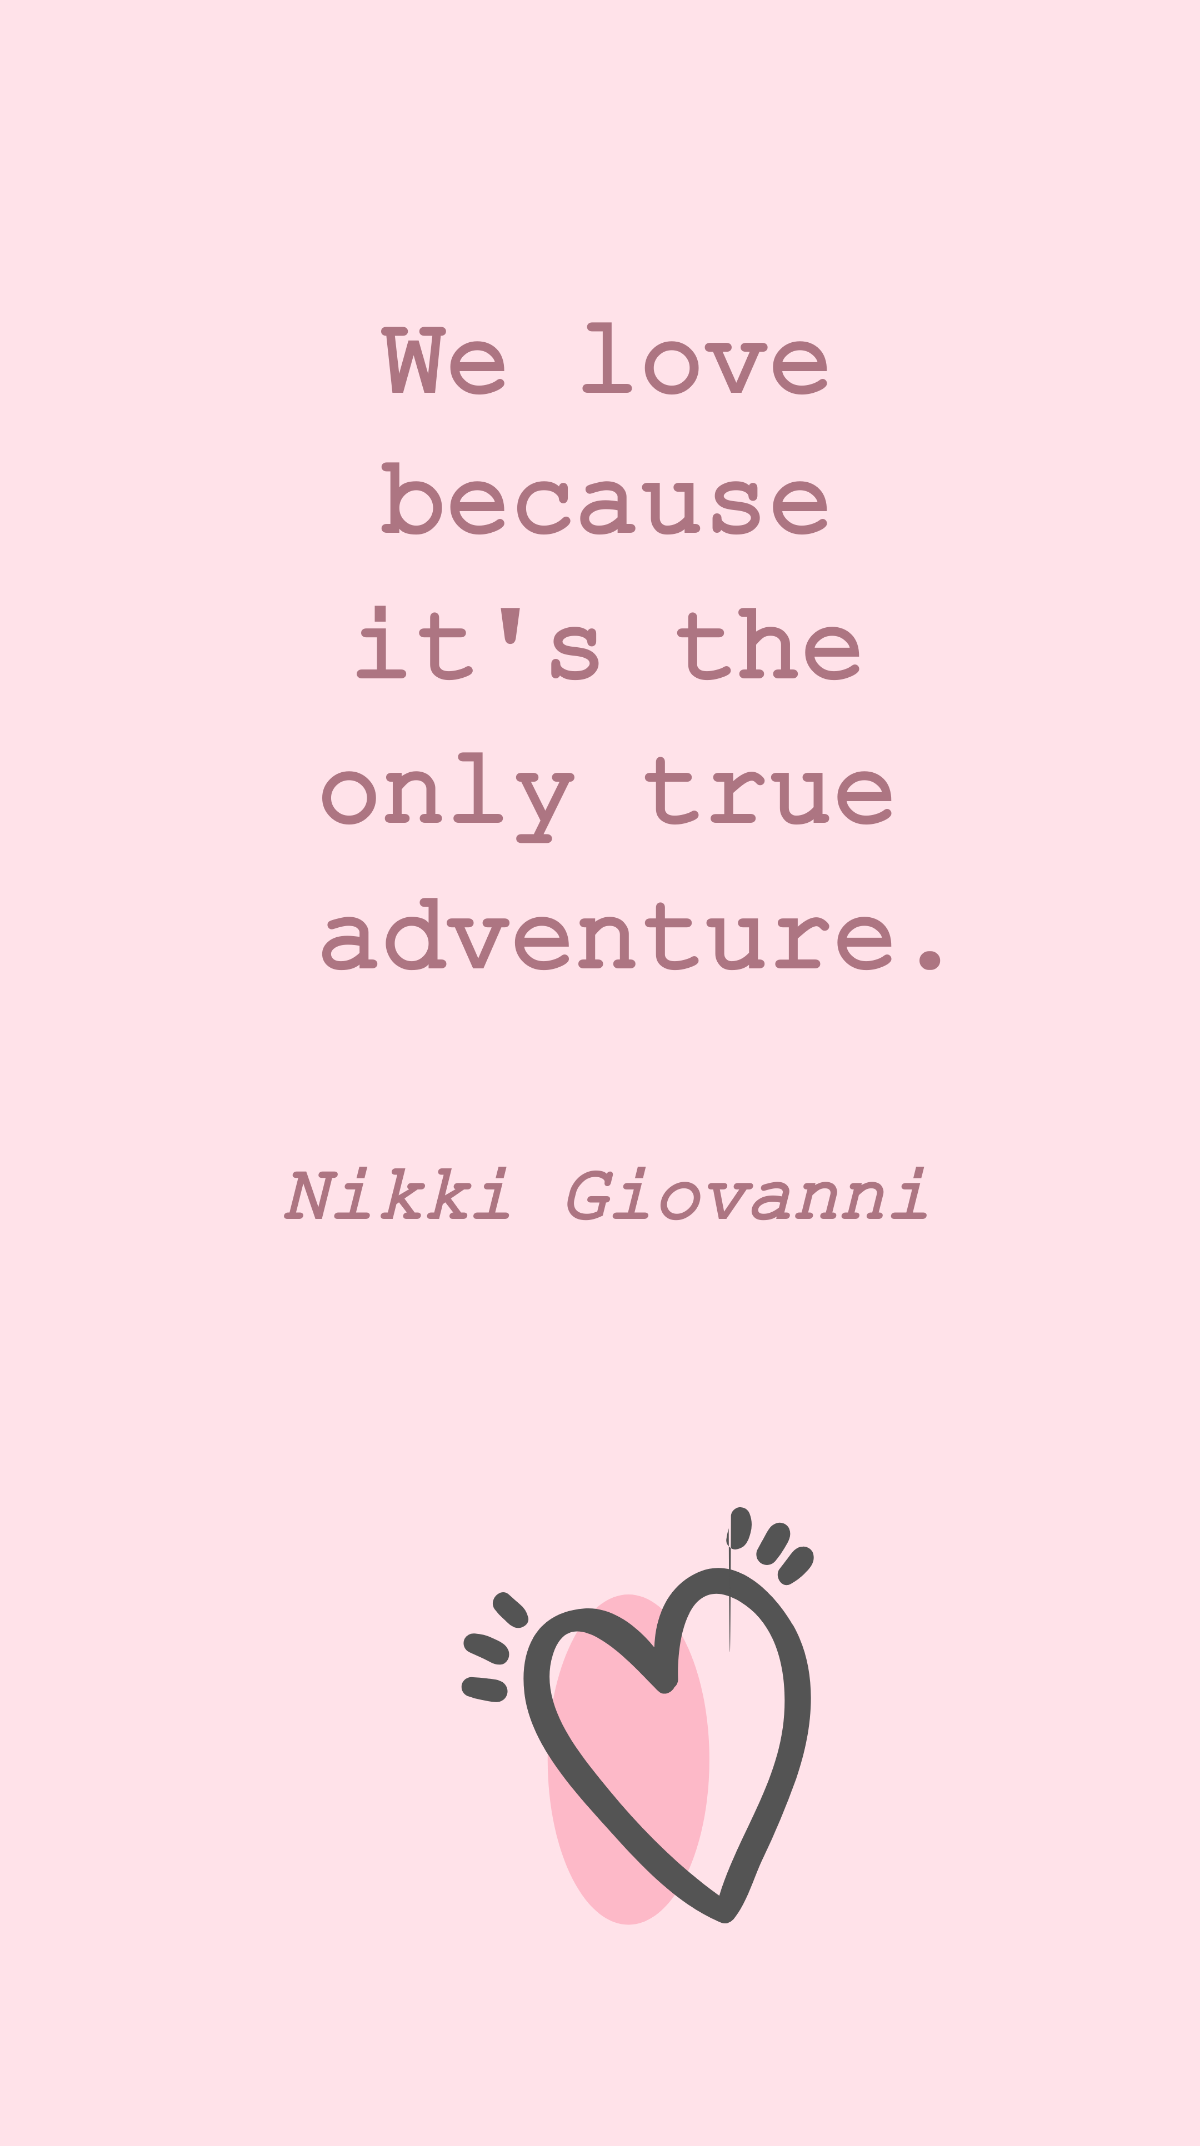 Free Nikki Giovanni - We love because it's the only true adventure. Template